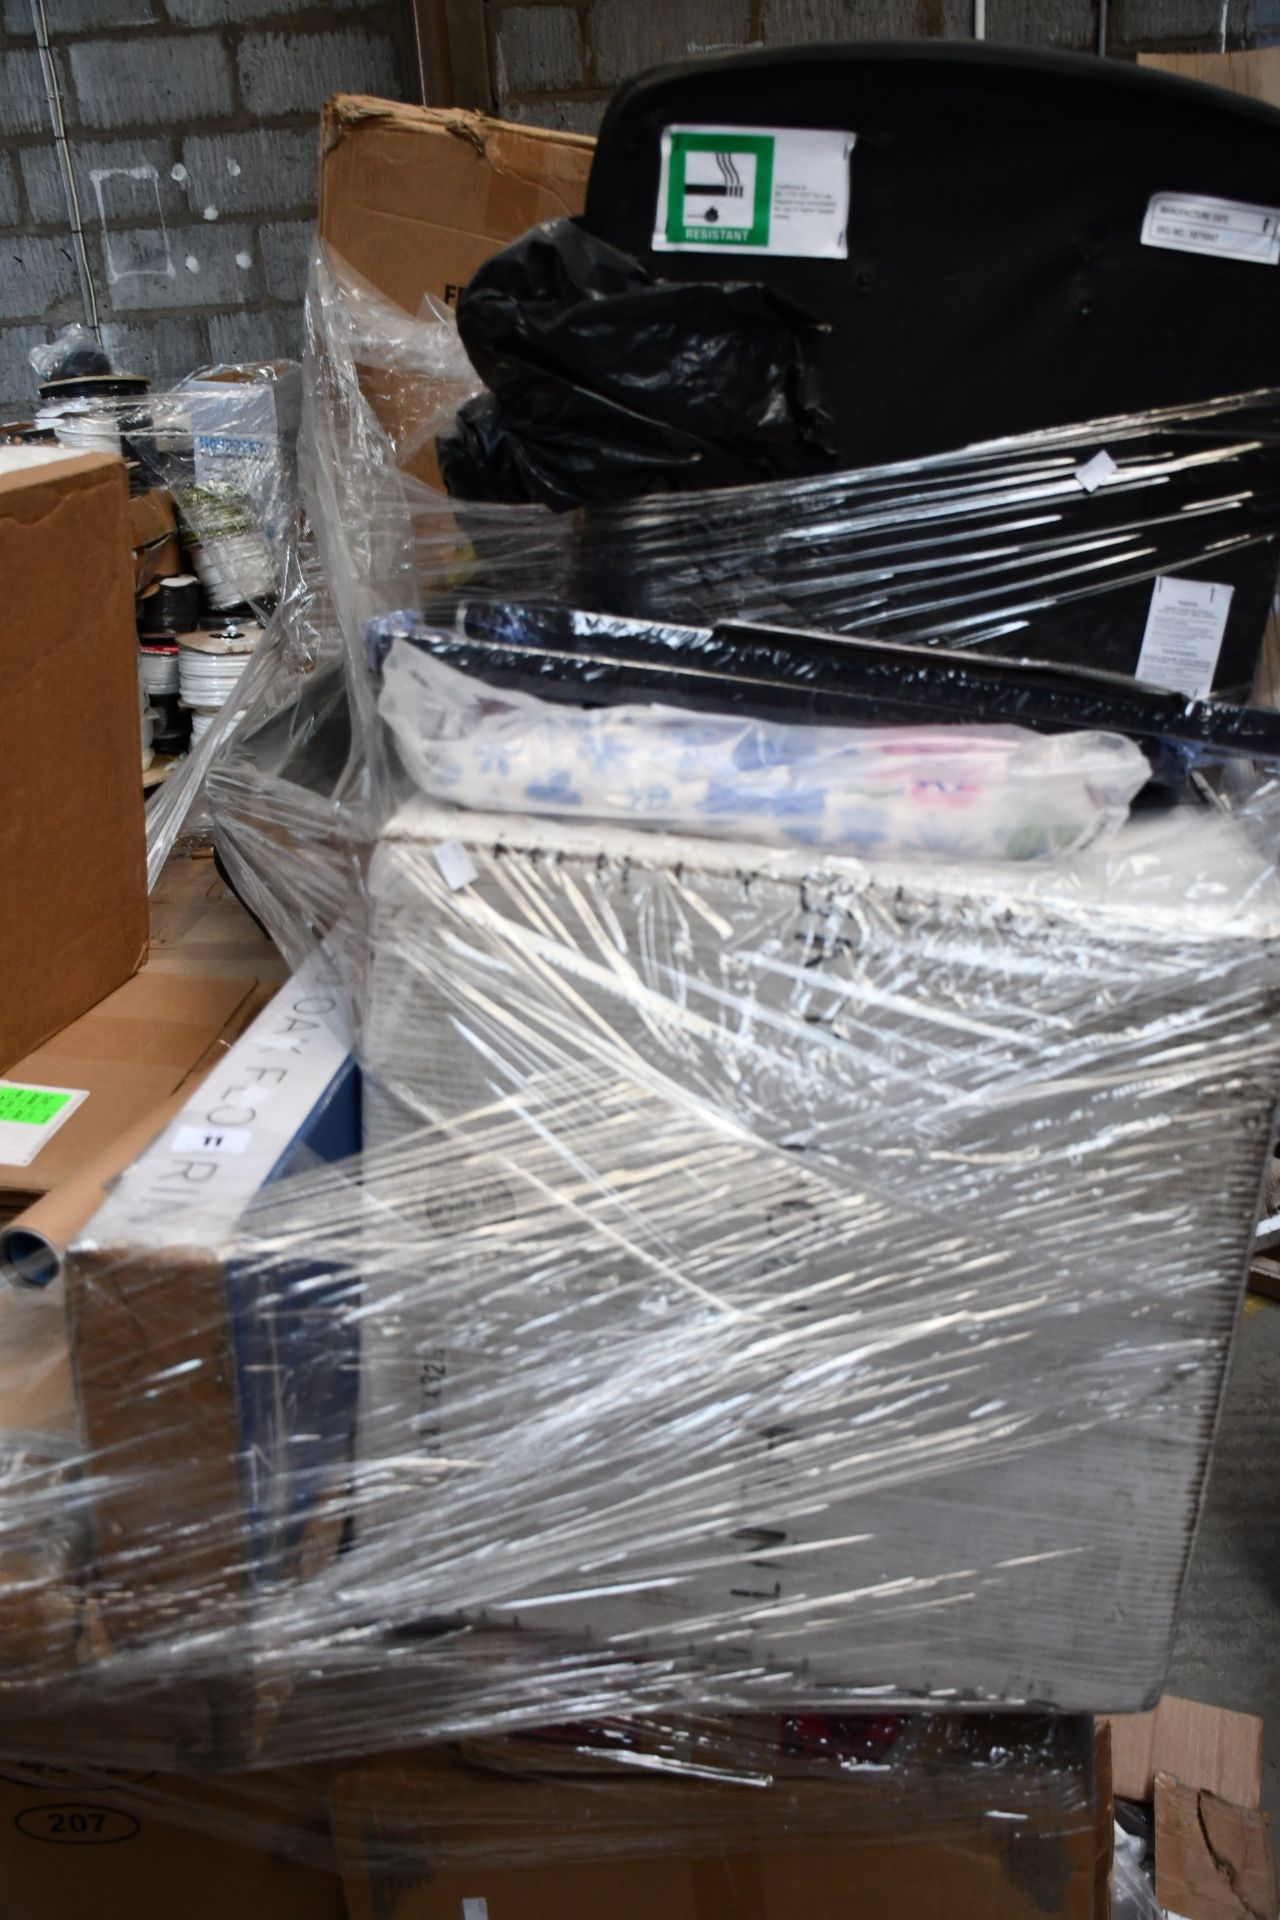 A pallet of miscellaneous furniture and related items.